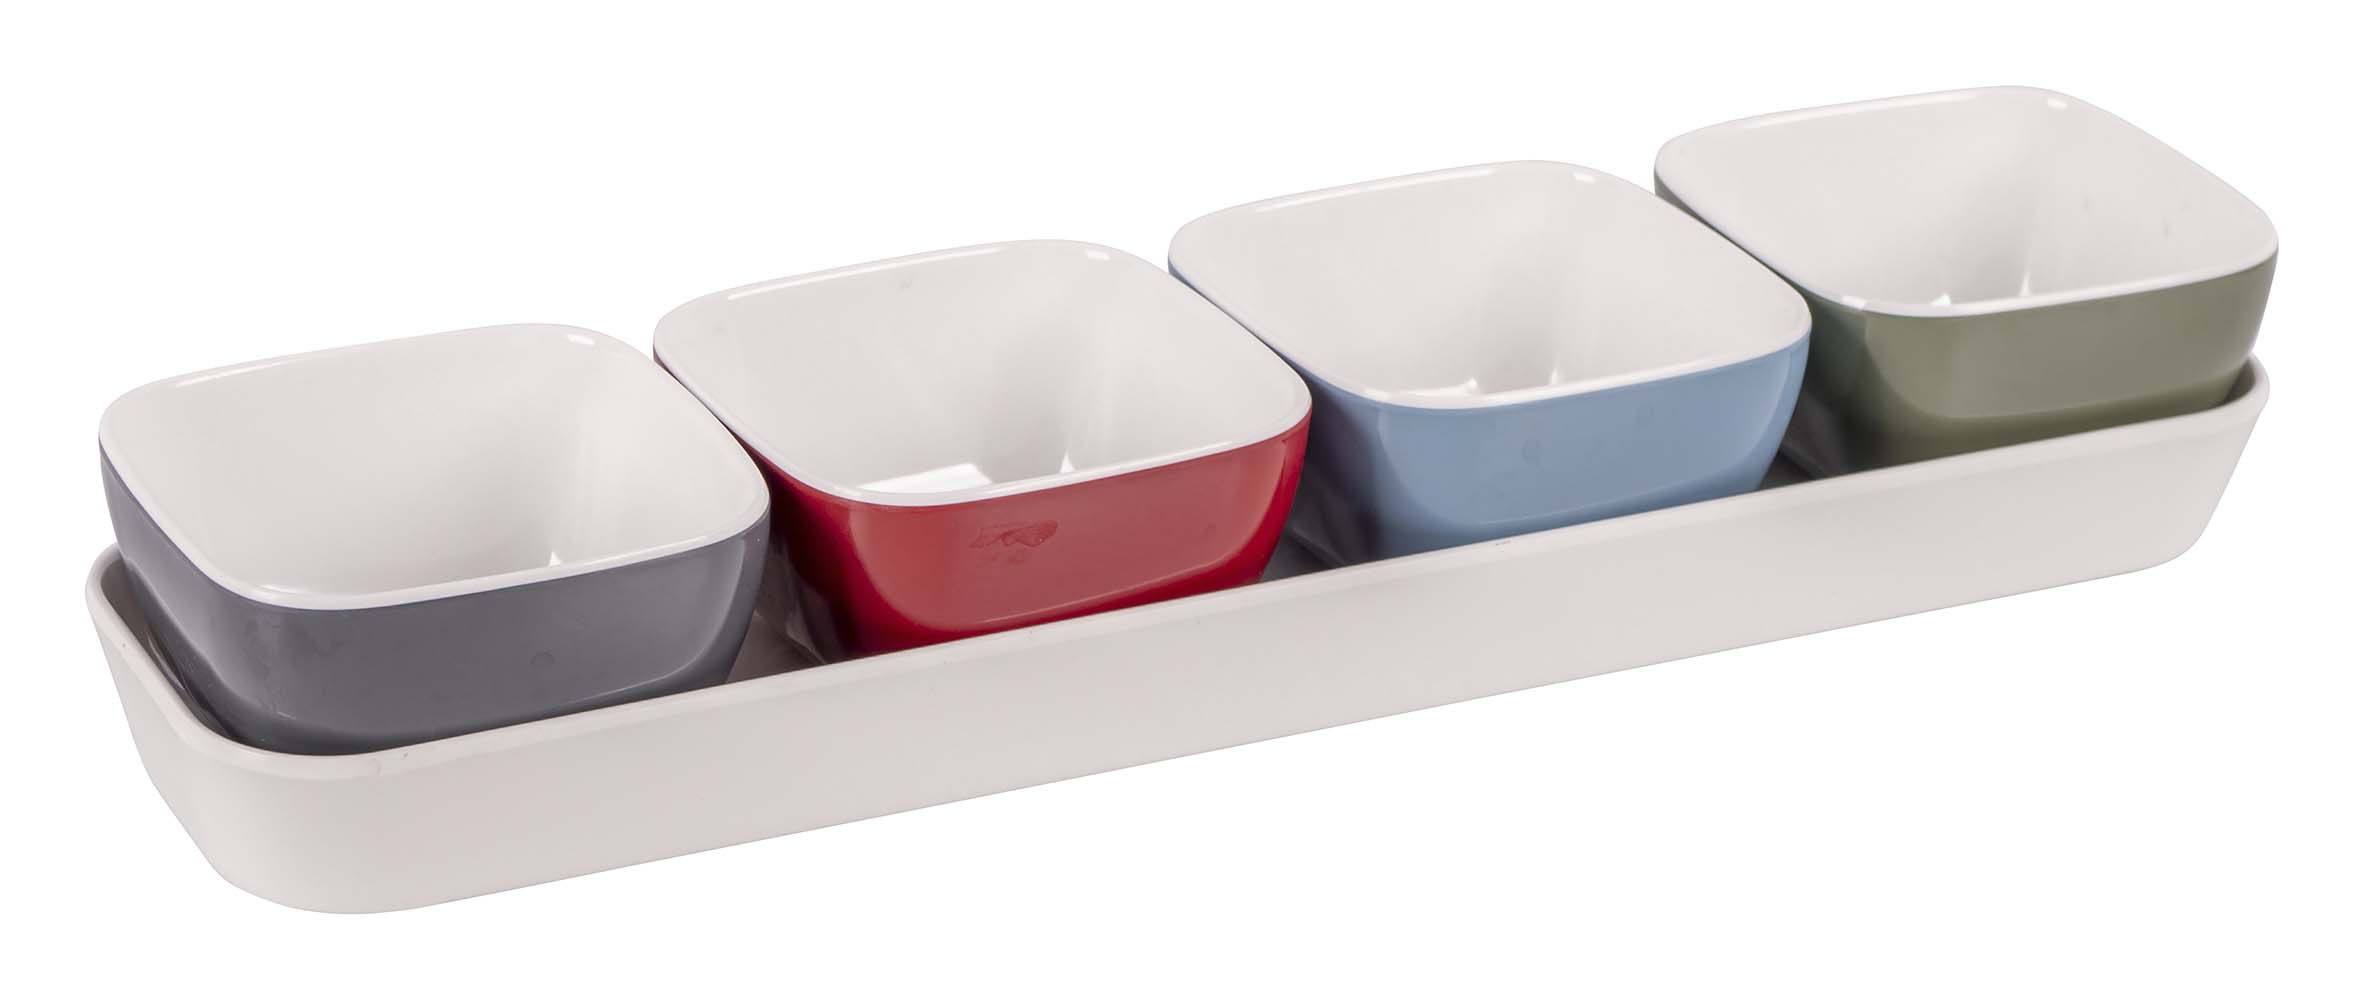 6181410 A handy snack set to present snacks in a stylish way. The set consists of 5 parts. The snack set is almost unbreakable and very lightweight. In addition, it is scratch resistant and dishwasher safe.